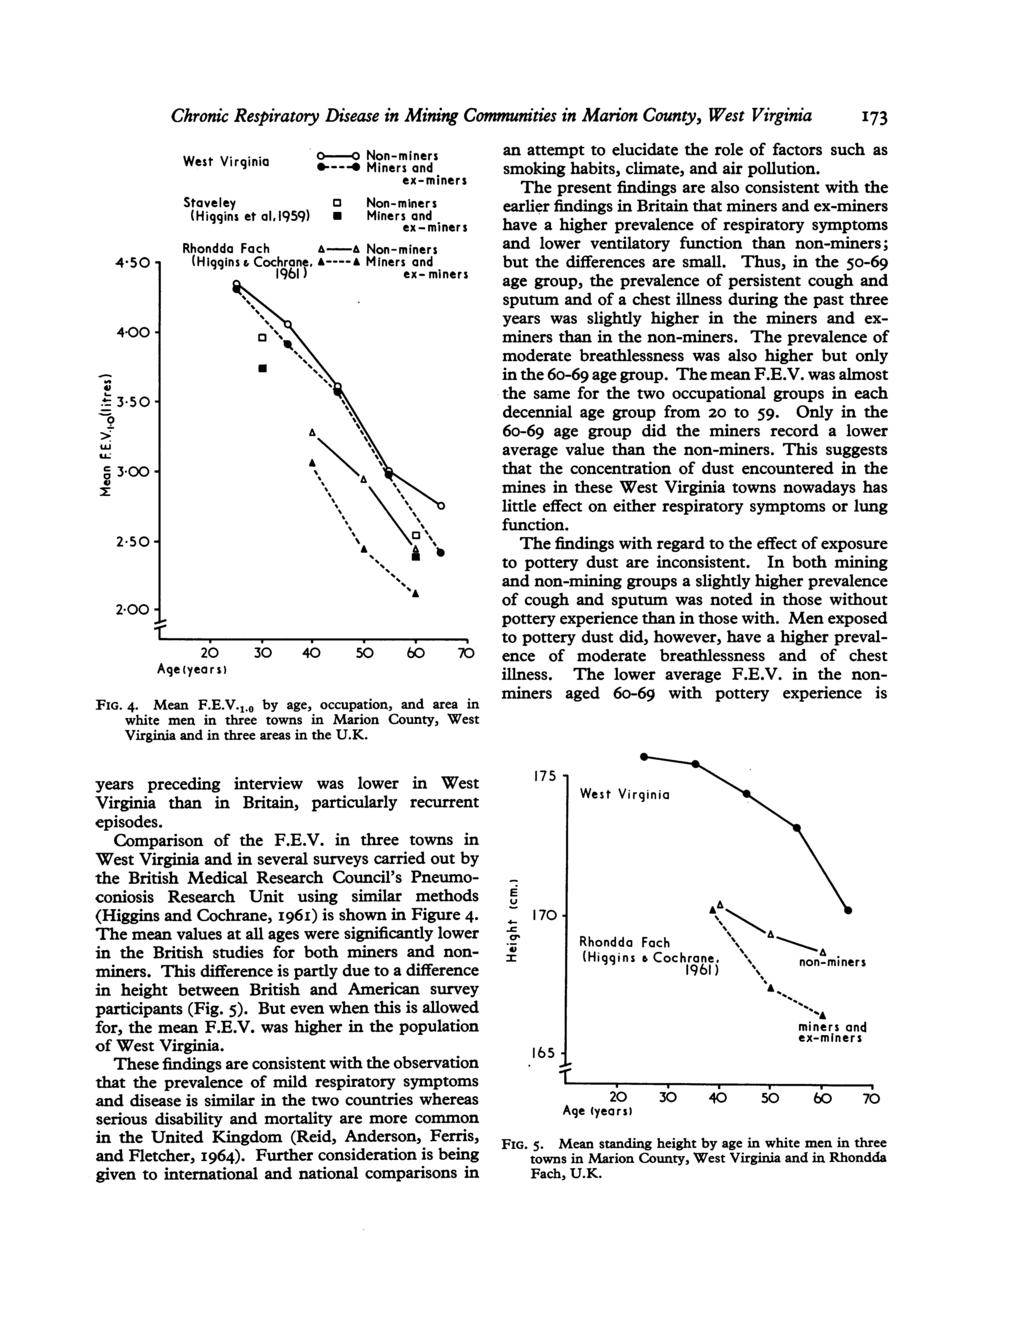 4 50 4-00 t 350-0 a 300-2-50 2-00 Chronic Respiratory Disease in Mining Communities in Marion County, West Virginia W0-o Non-miners West Virginia 0--- Miners and Staveley (Hiqgins et al, 1959) 20 Age